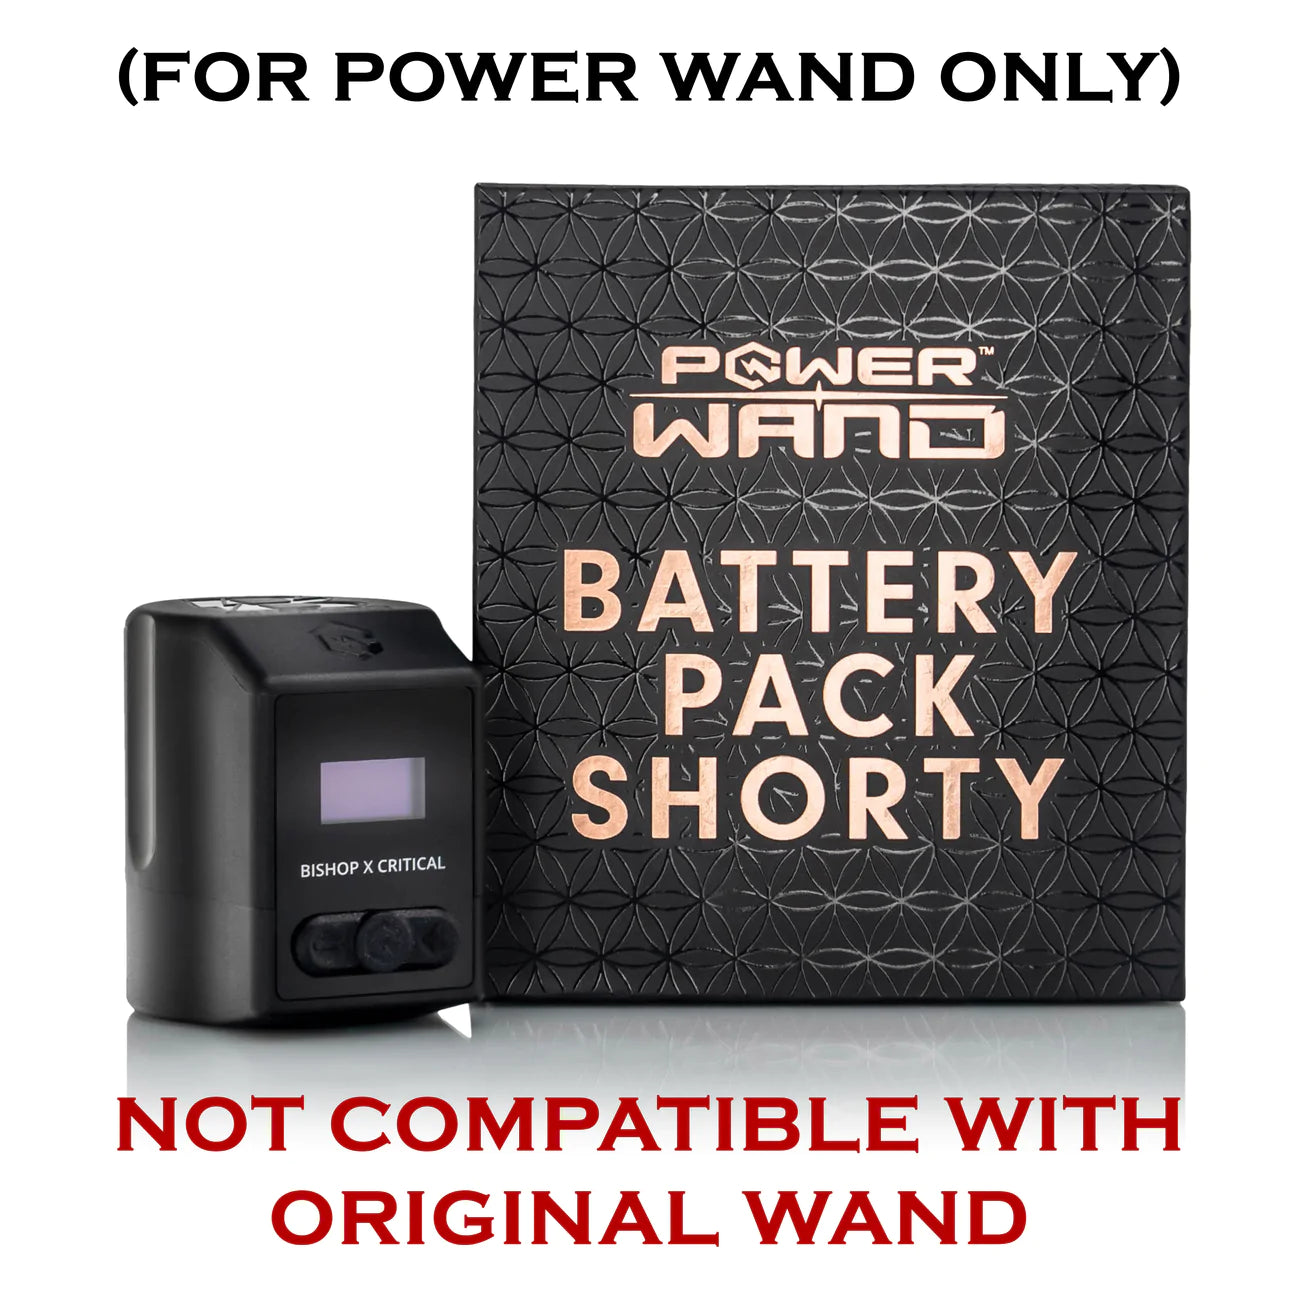 Critical x Bishop Power Wand Battery Pack — Shorty